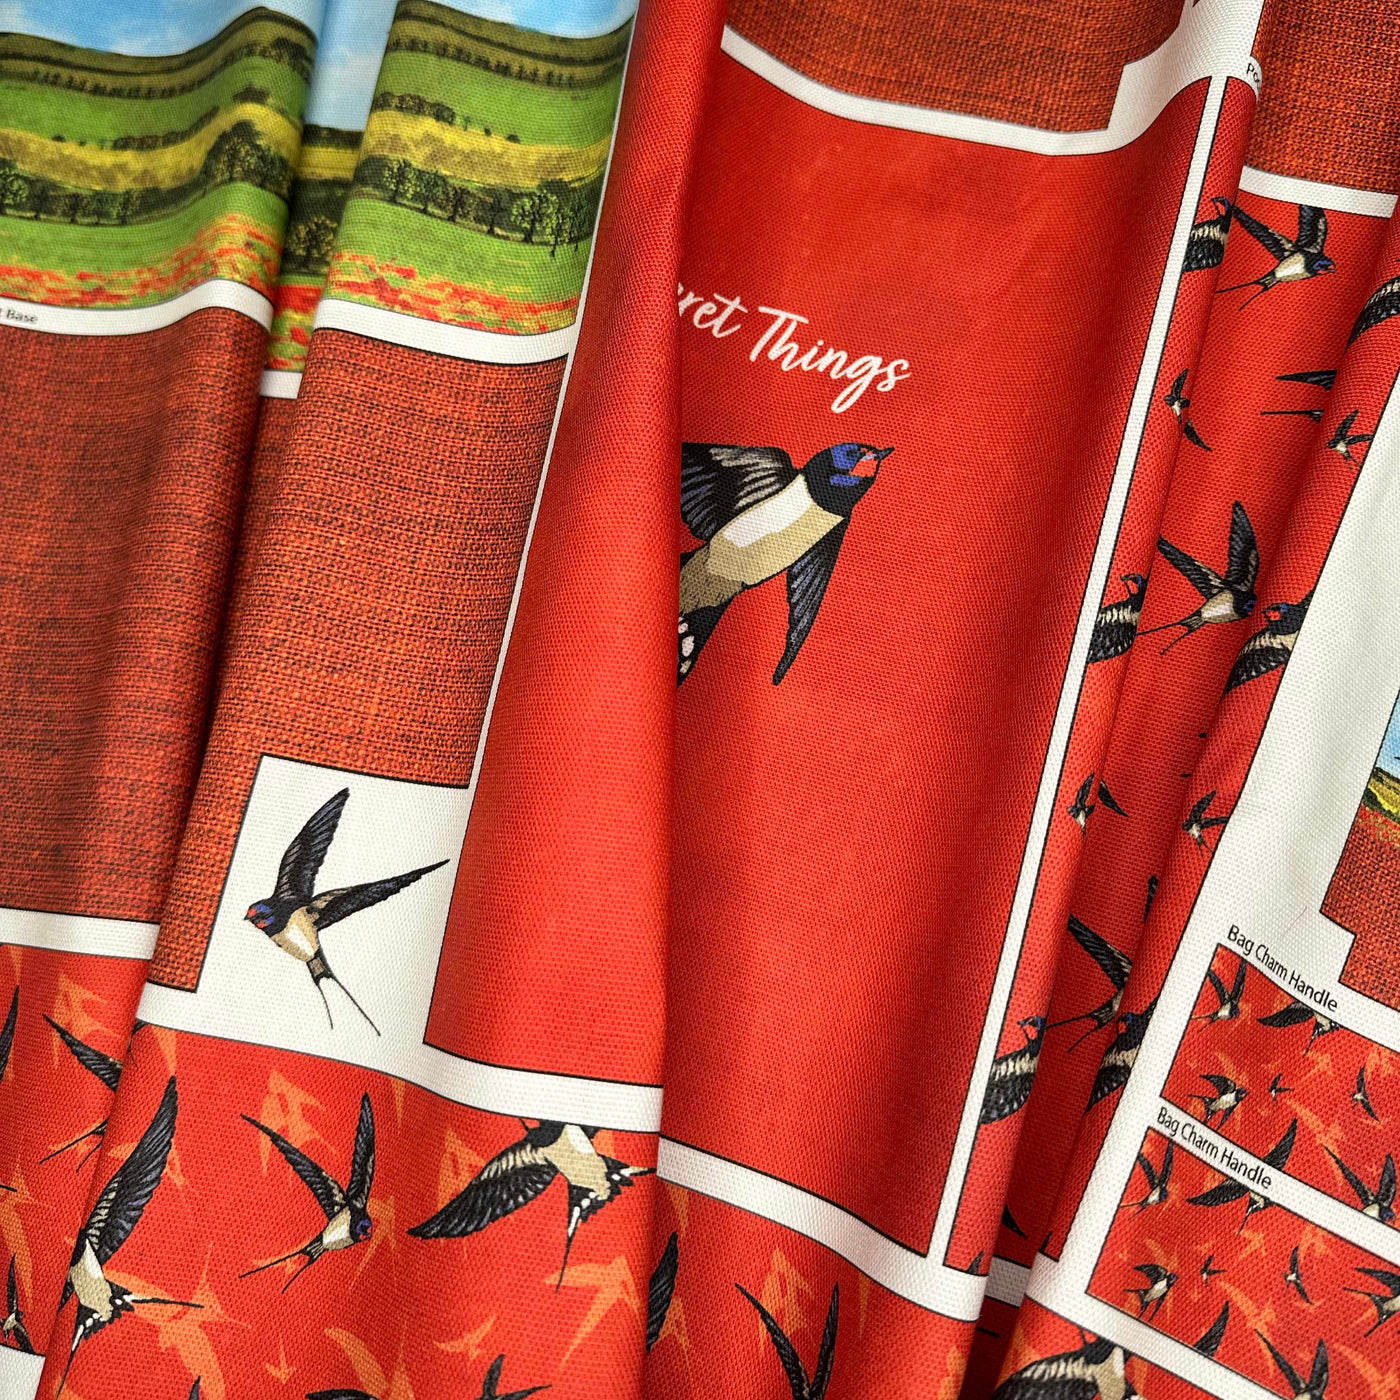 The Totally Tote - Swallows In The Sky Sewing Kit